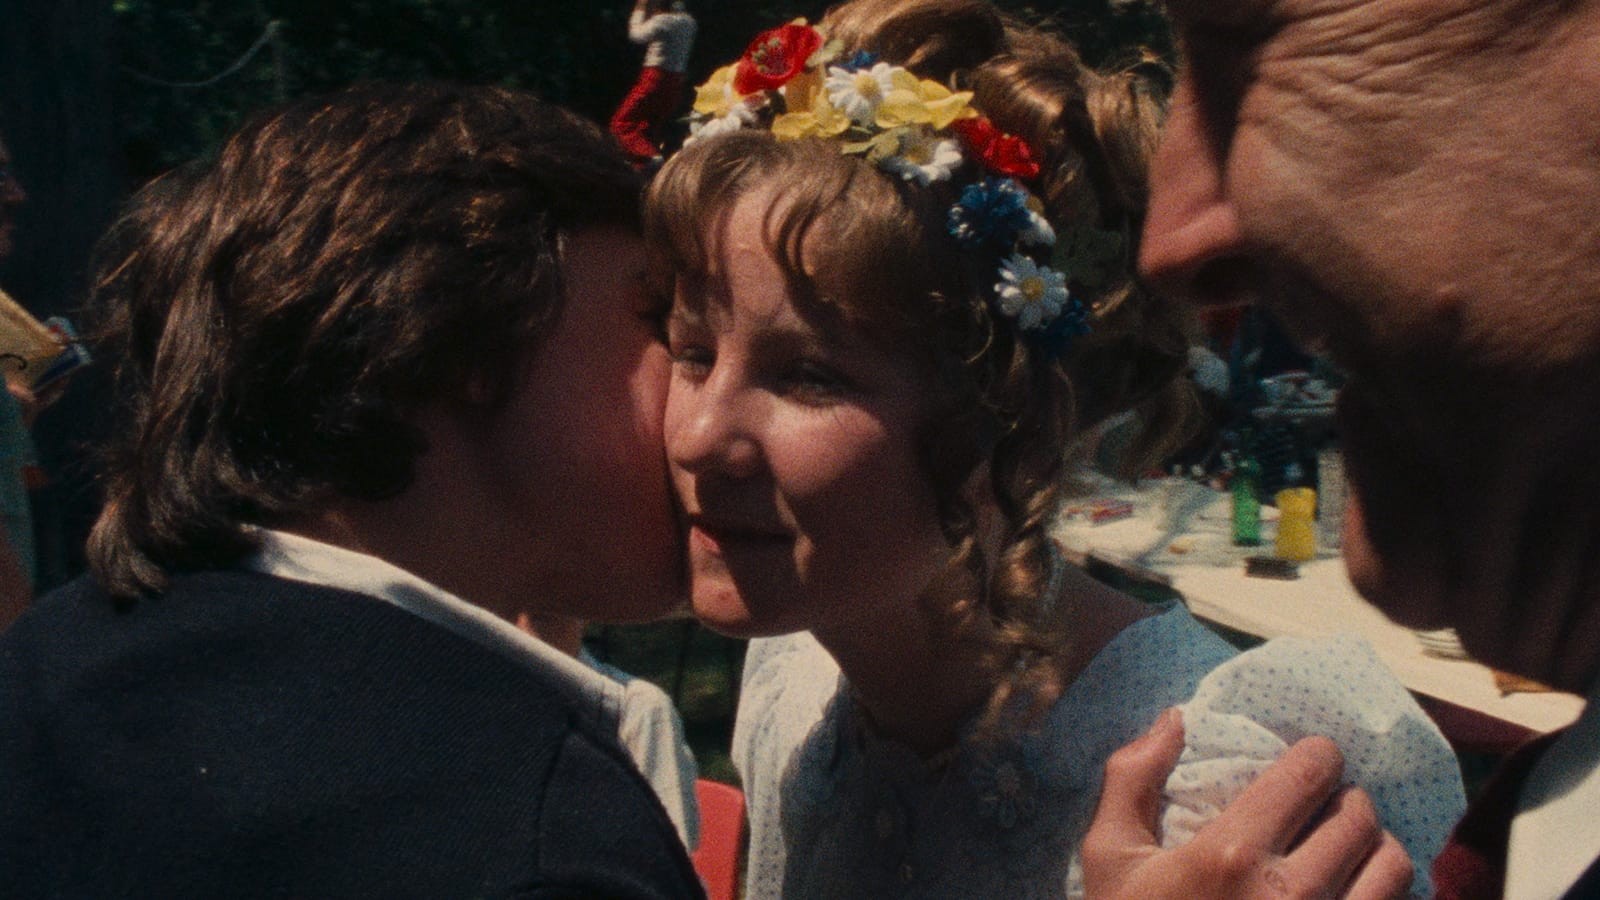 Man kissing a woman on the cheek. Woman is wearing a white dress with red, yellow, white, and blue flower headband.